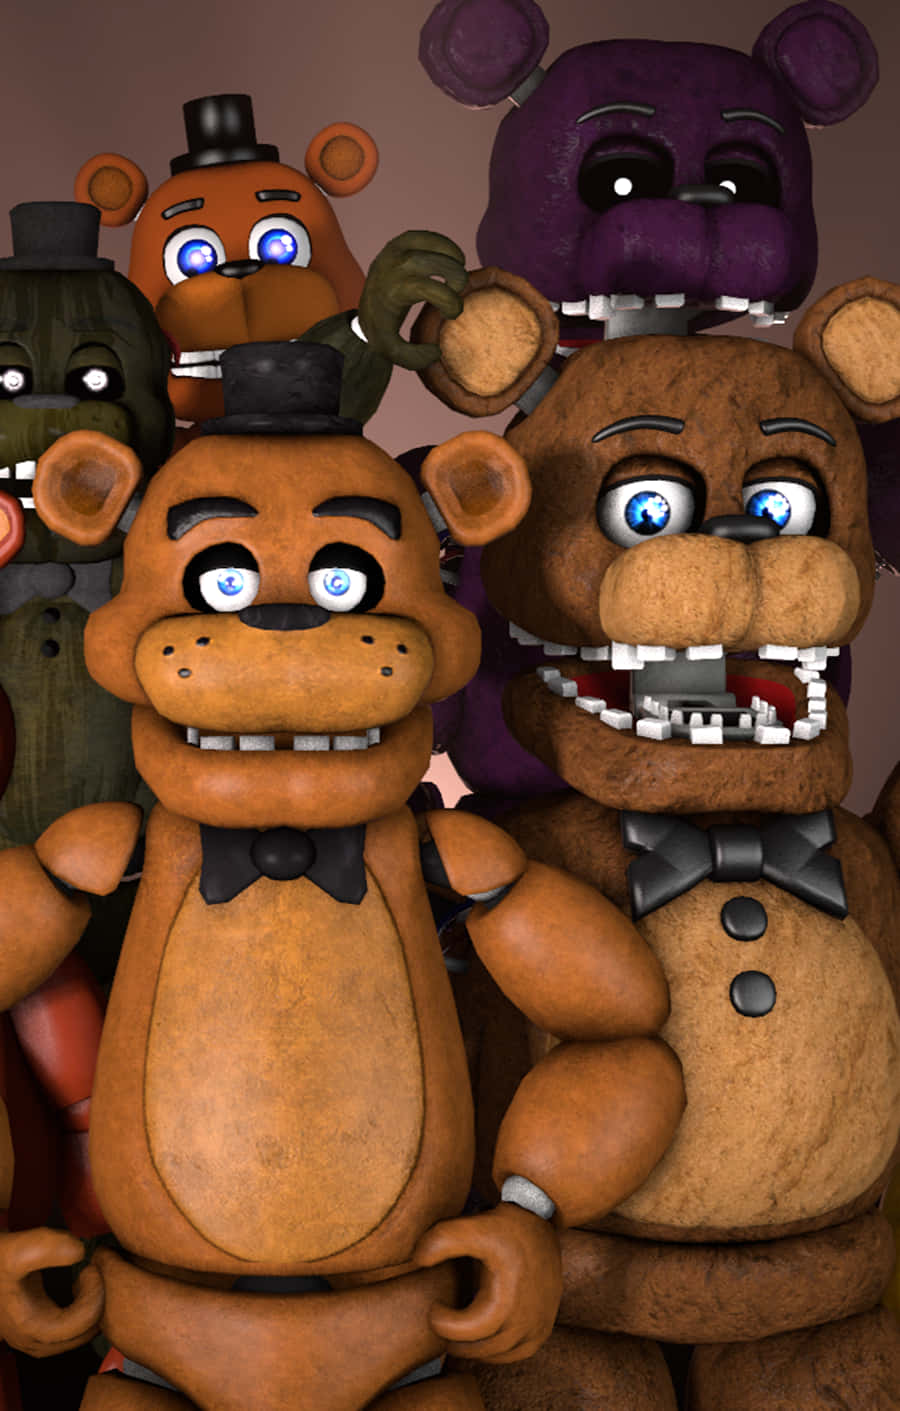 "Jump into the action with Five Nights At Freddys on your Iphone!" Wallpaper